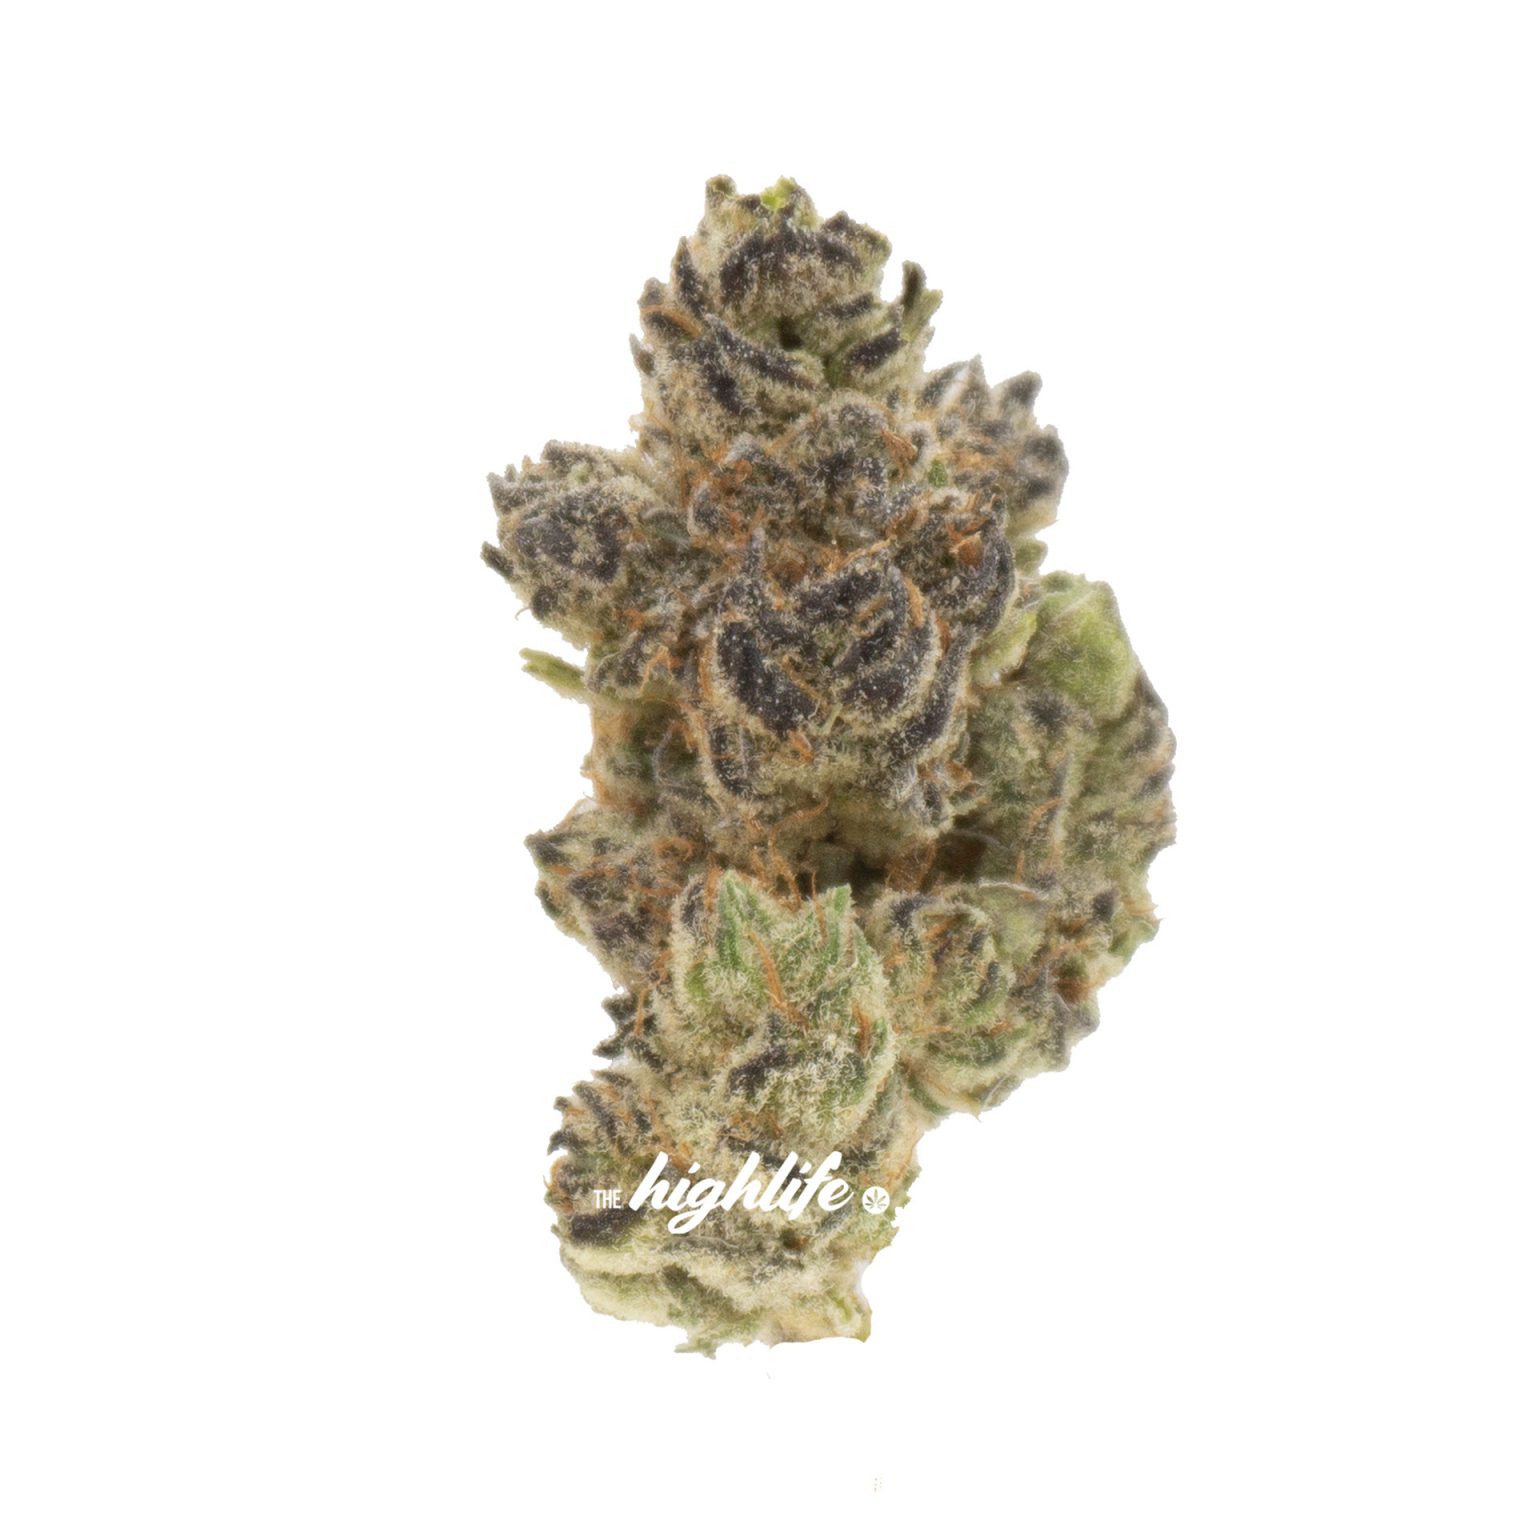 buy weed in ottawa - same day delivery purple drank breath strain